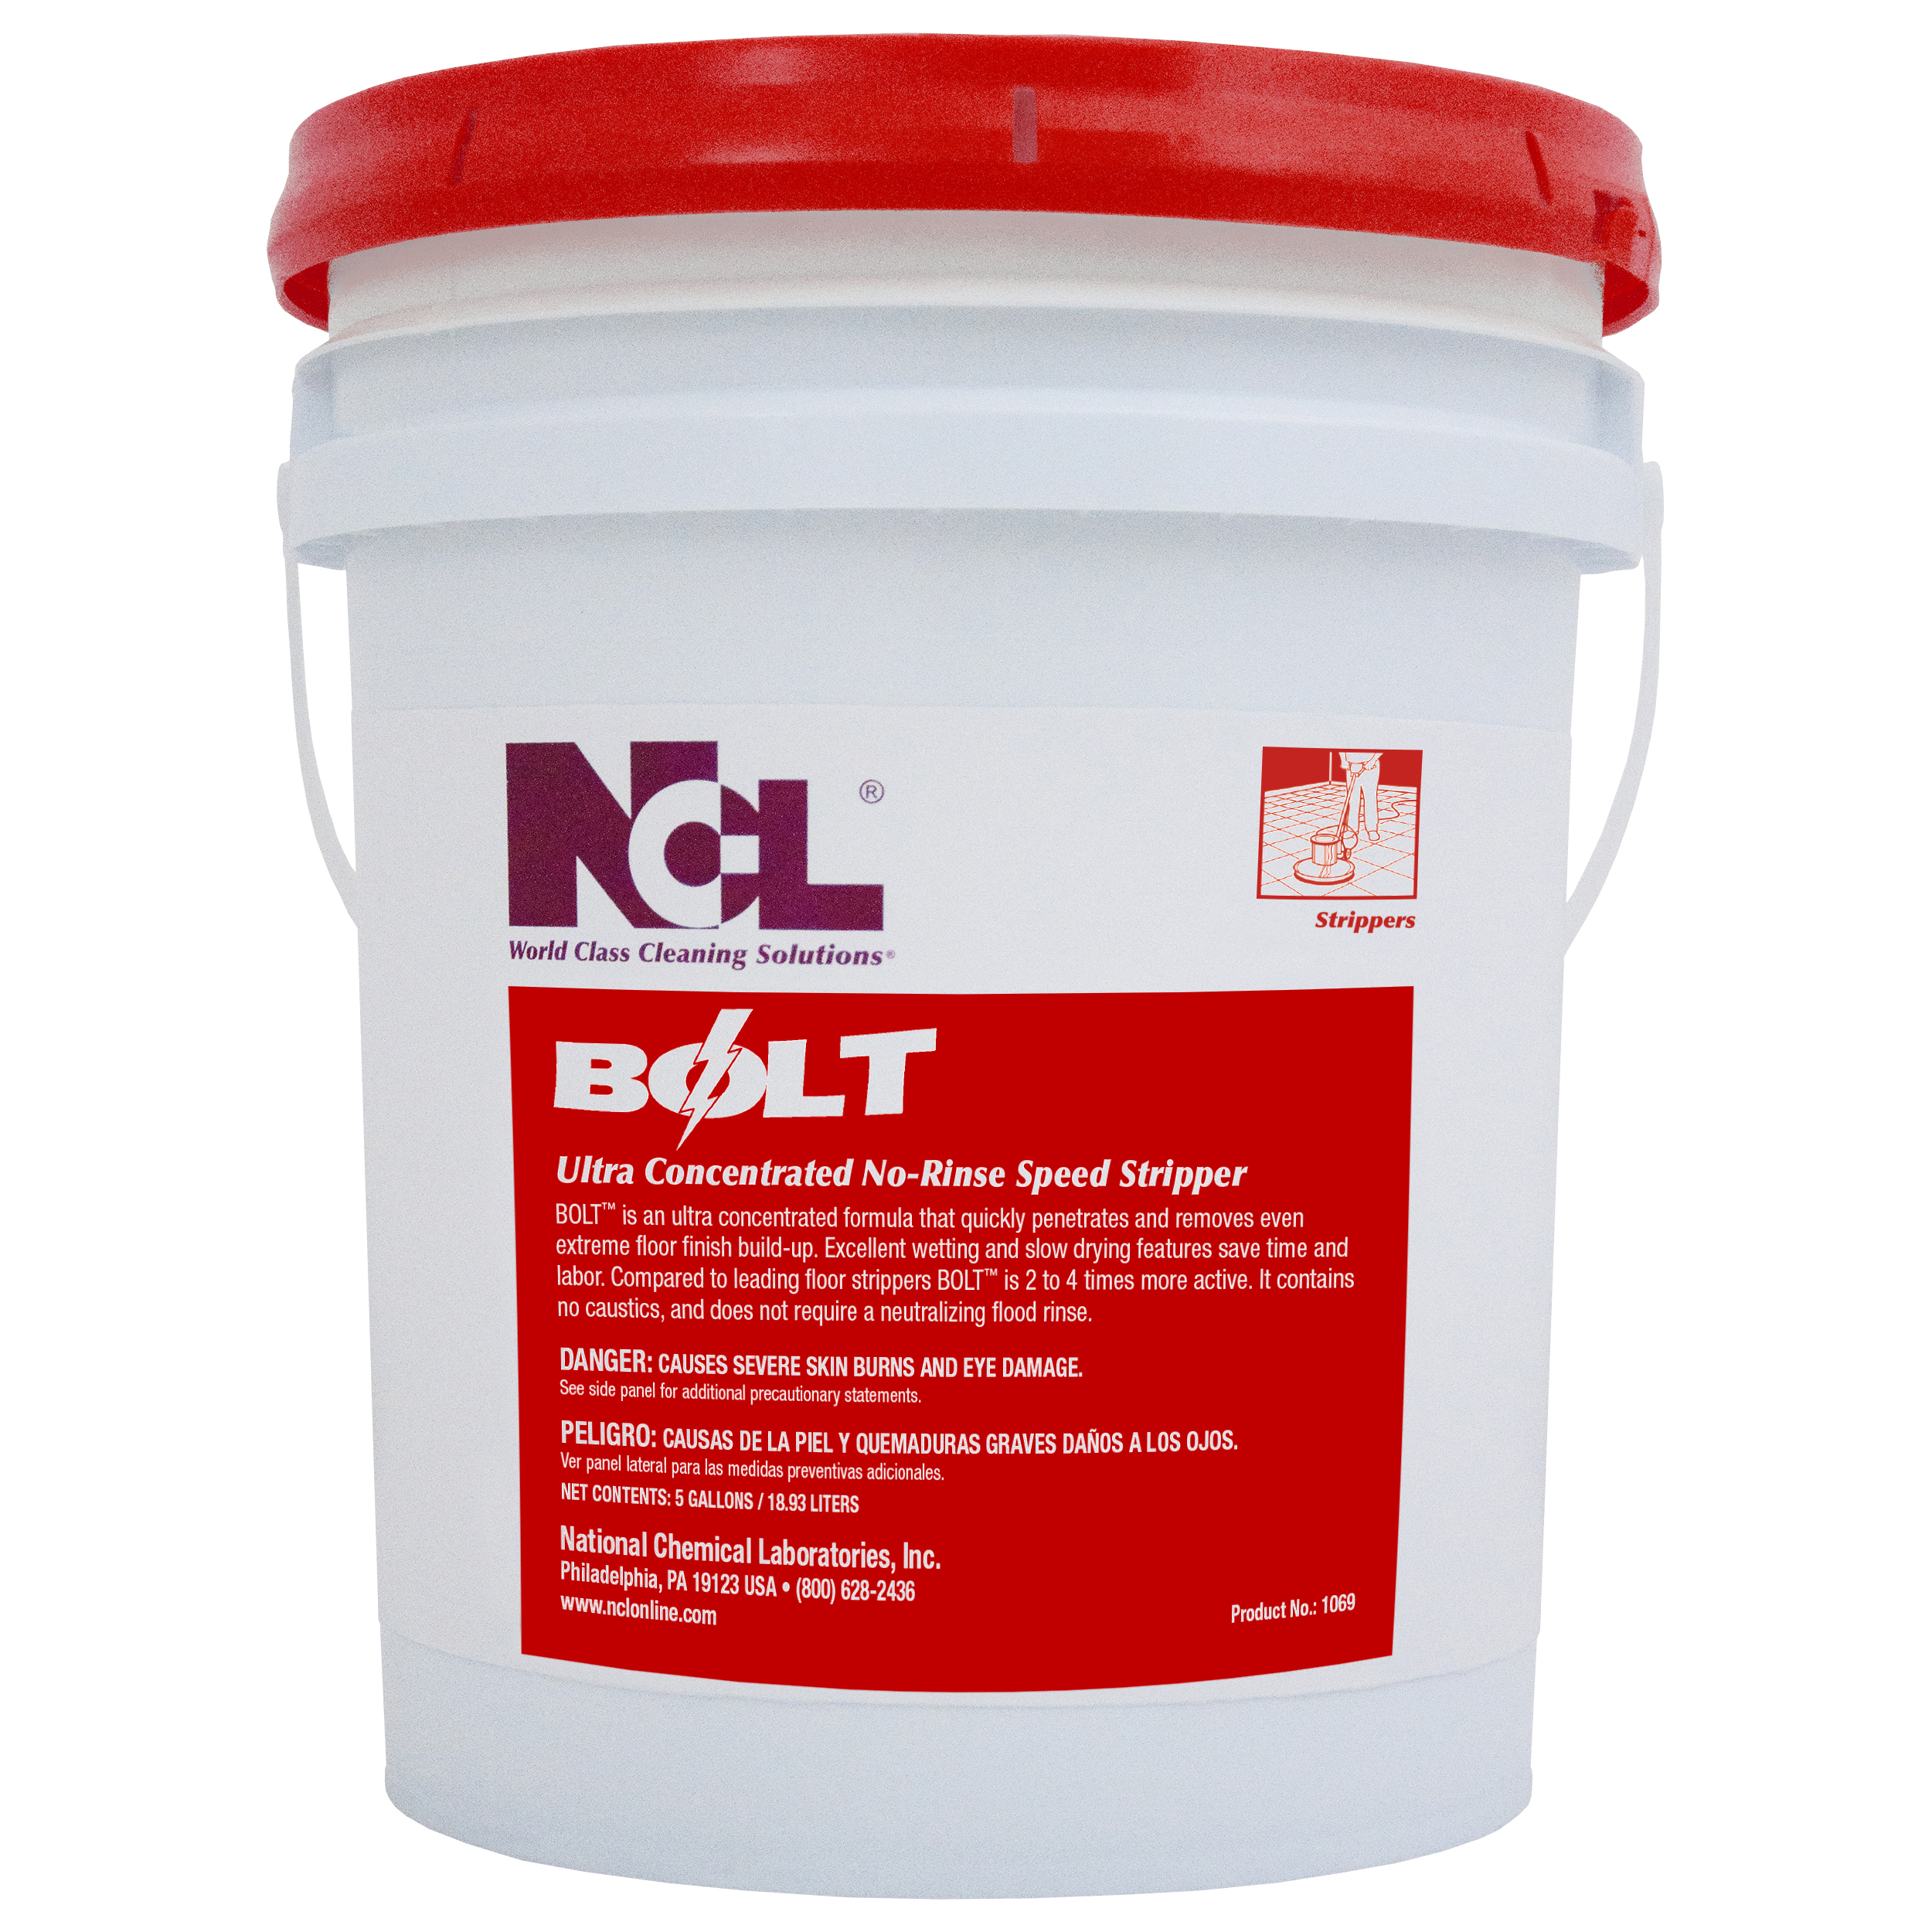  BOLT Ultra Concentrated No-Rinse Speed Stripper 5 Gal. Pail (NCL1069-21) 